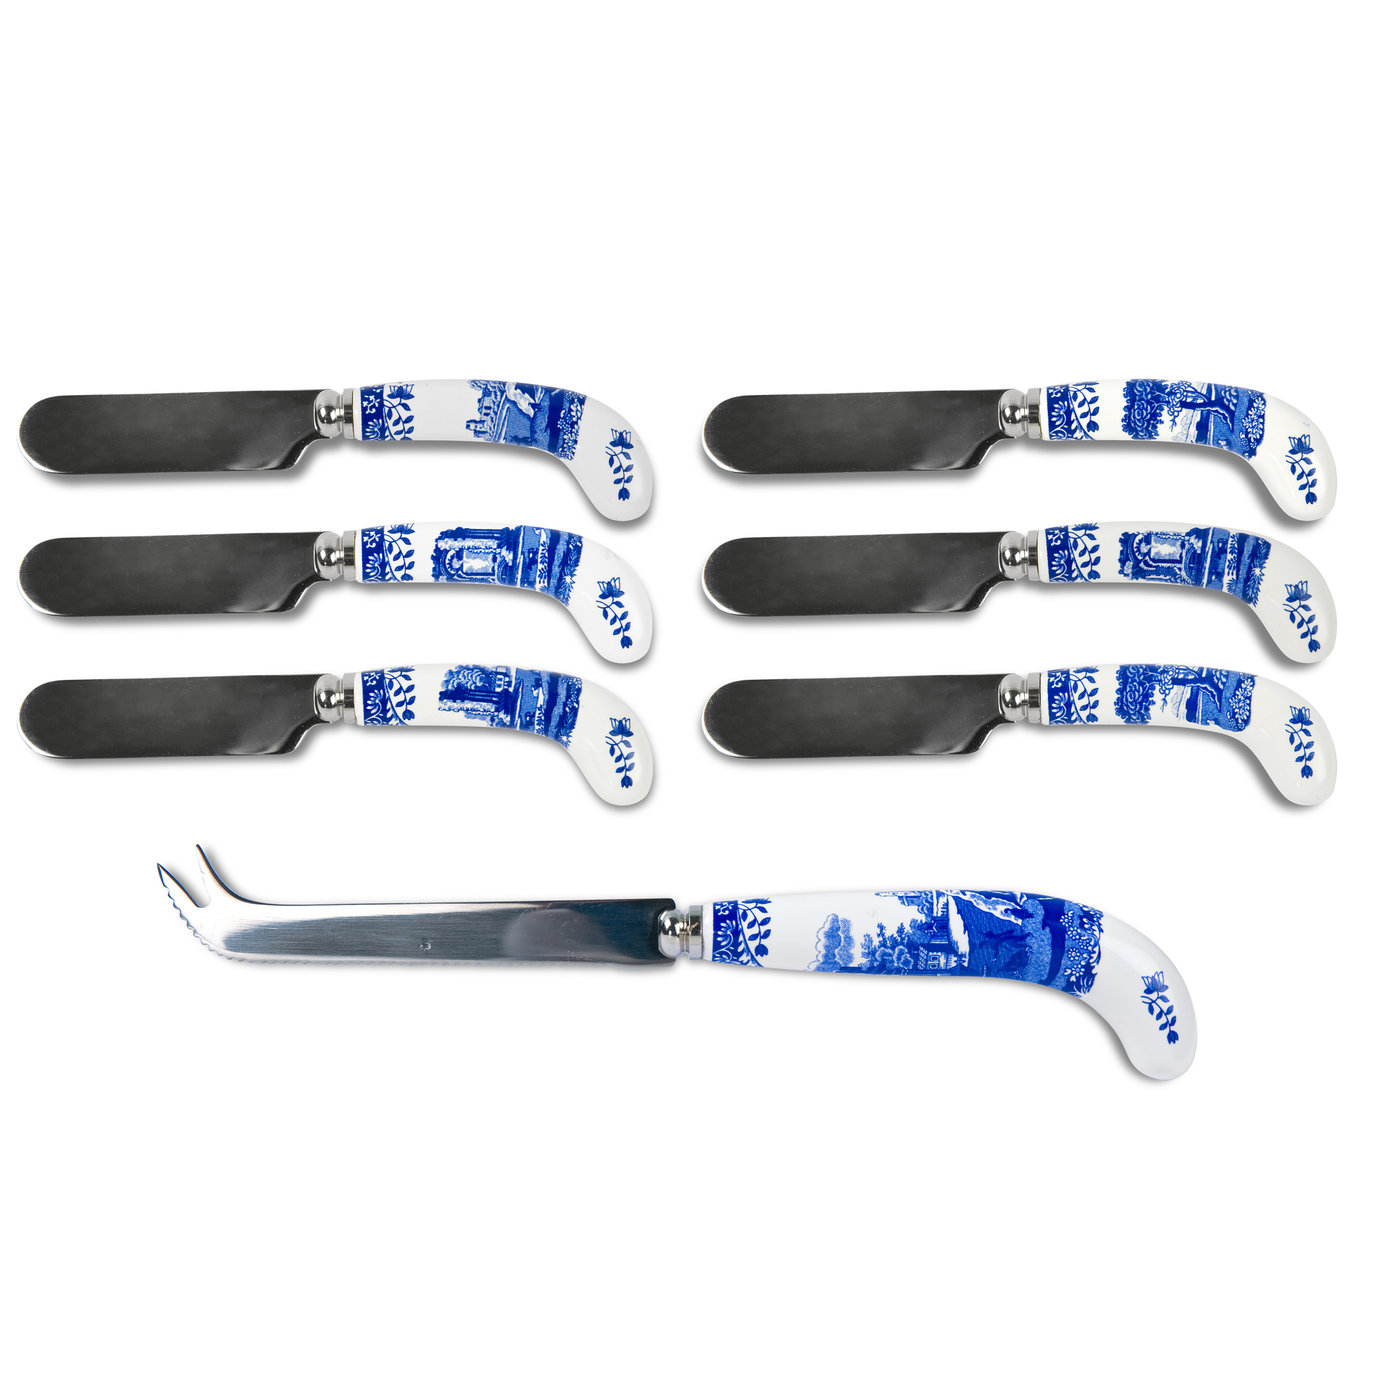 Blue Italian Cheese Knife and Spreader Set